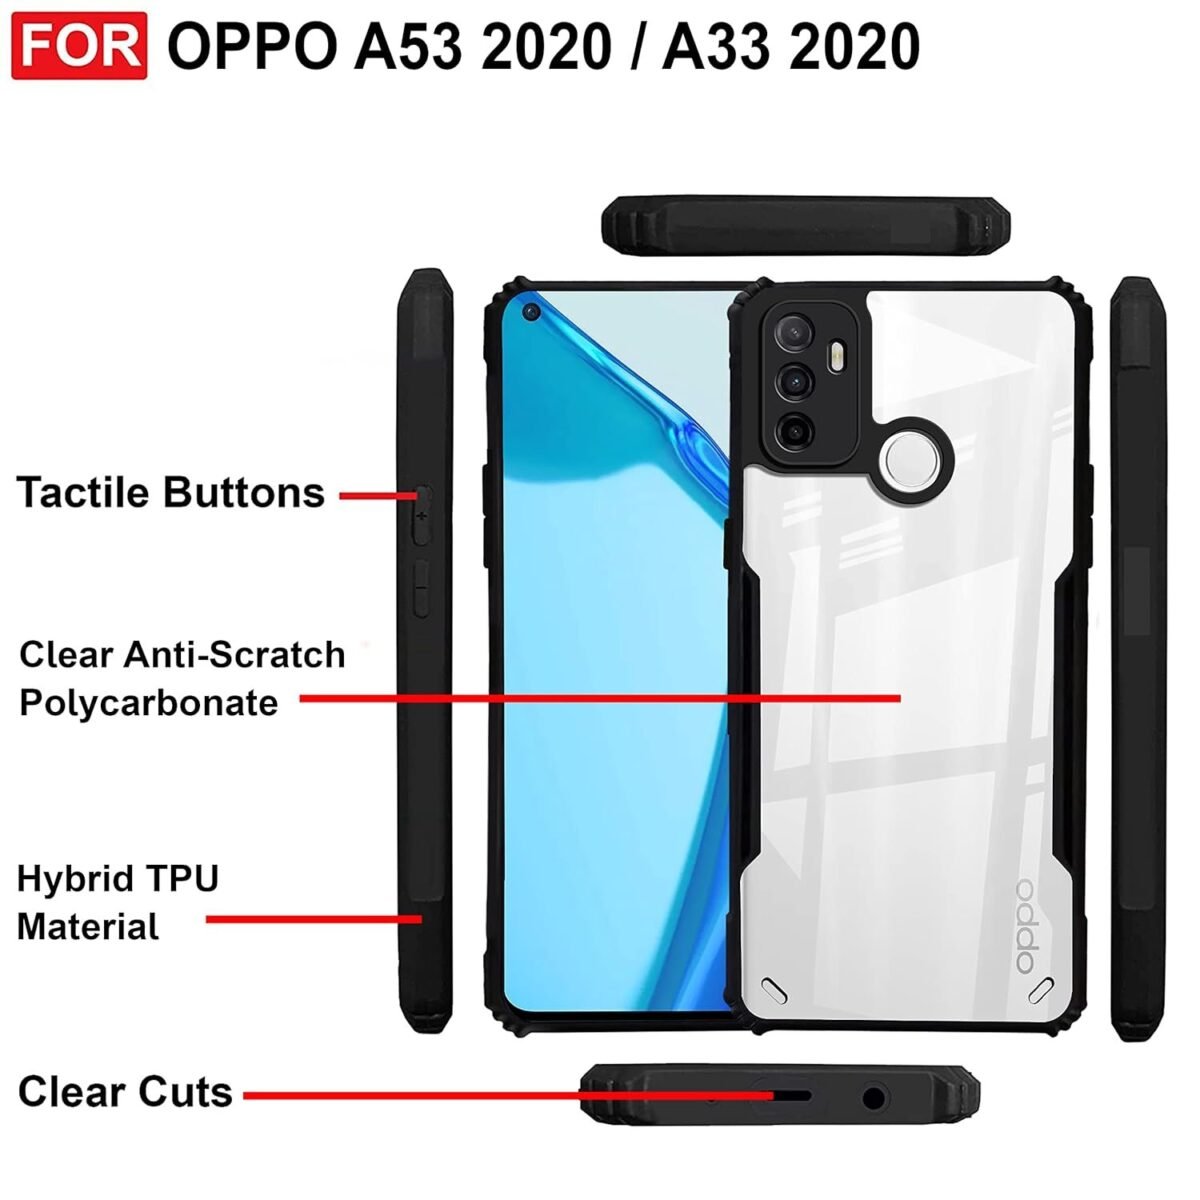 Back Case Cover for Oppo A53 (2020) / A33 (2020) | Compatible for Oppo A53 (2020) / A33 (2020) Back Case